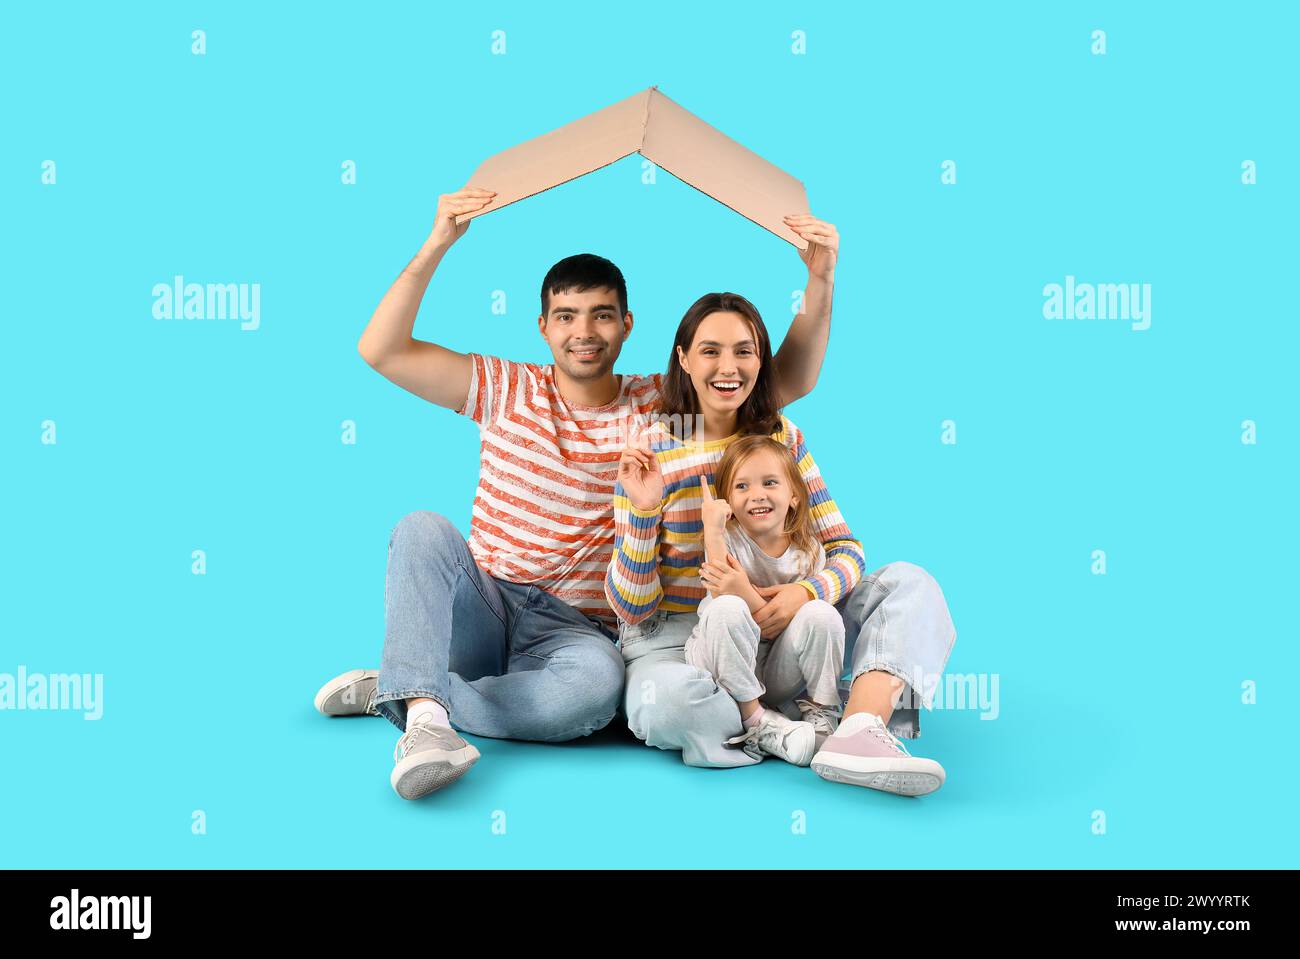 Happy family with cardboard in shape of roof dreaming about their new house on blue background Stock Photo